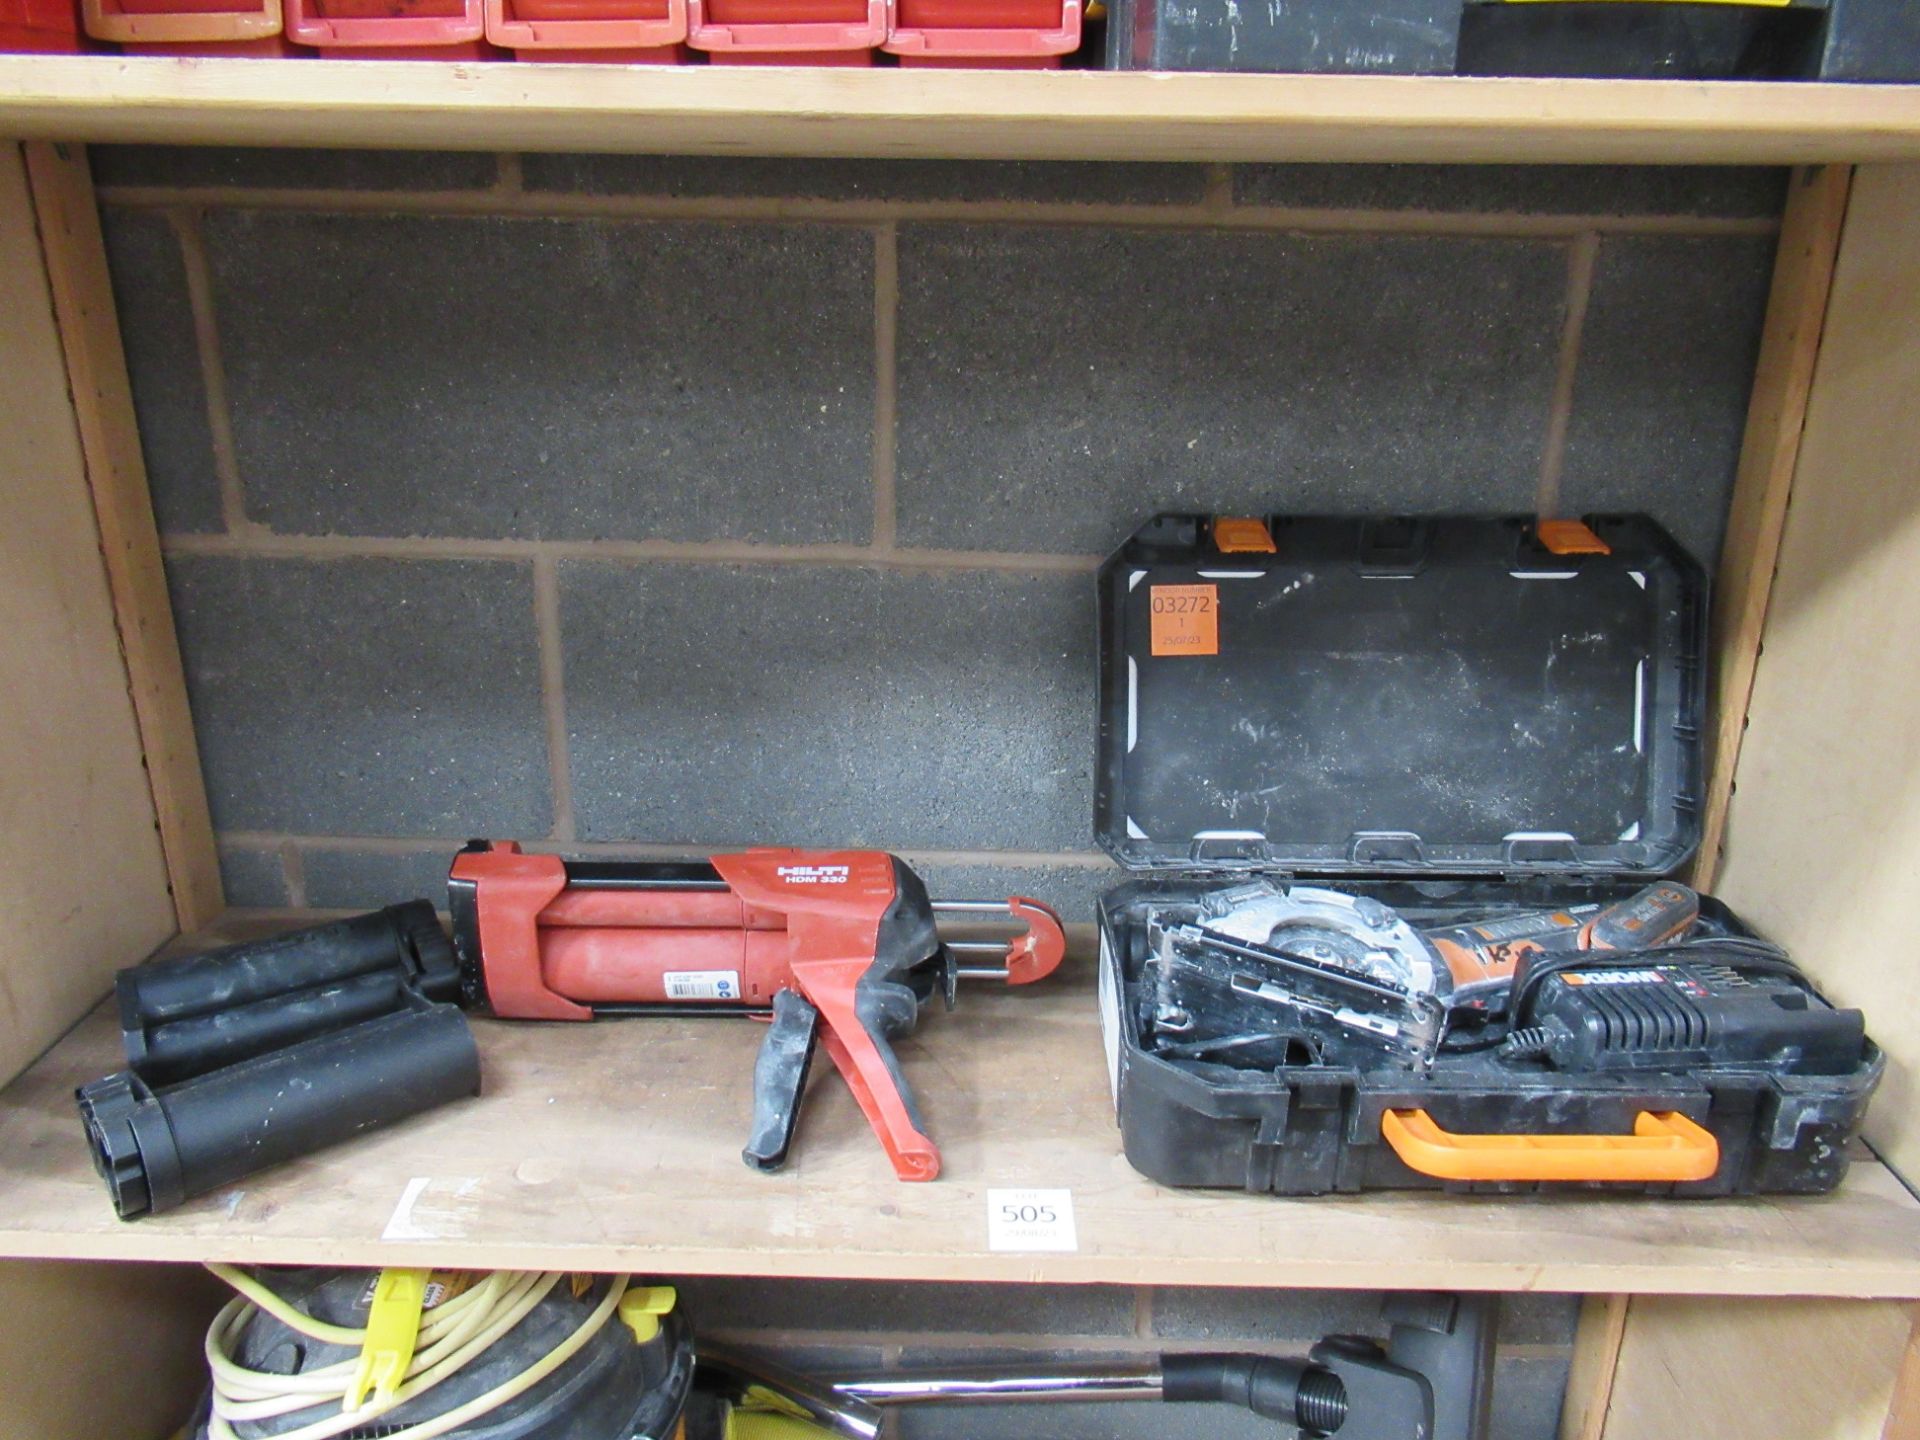 A Hilti HDM330 together with a Worx 20V battery powered cutter/grinder